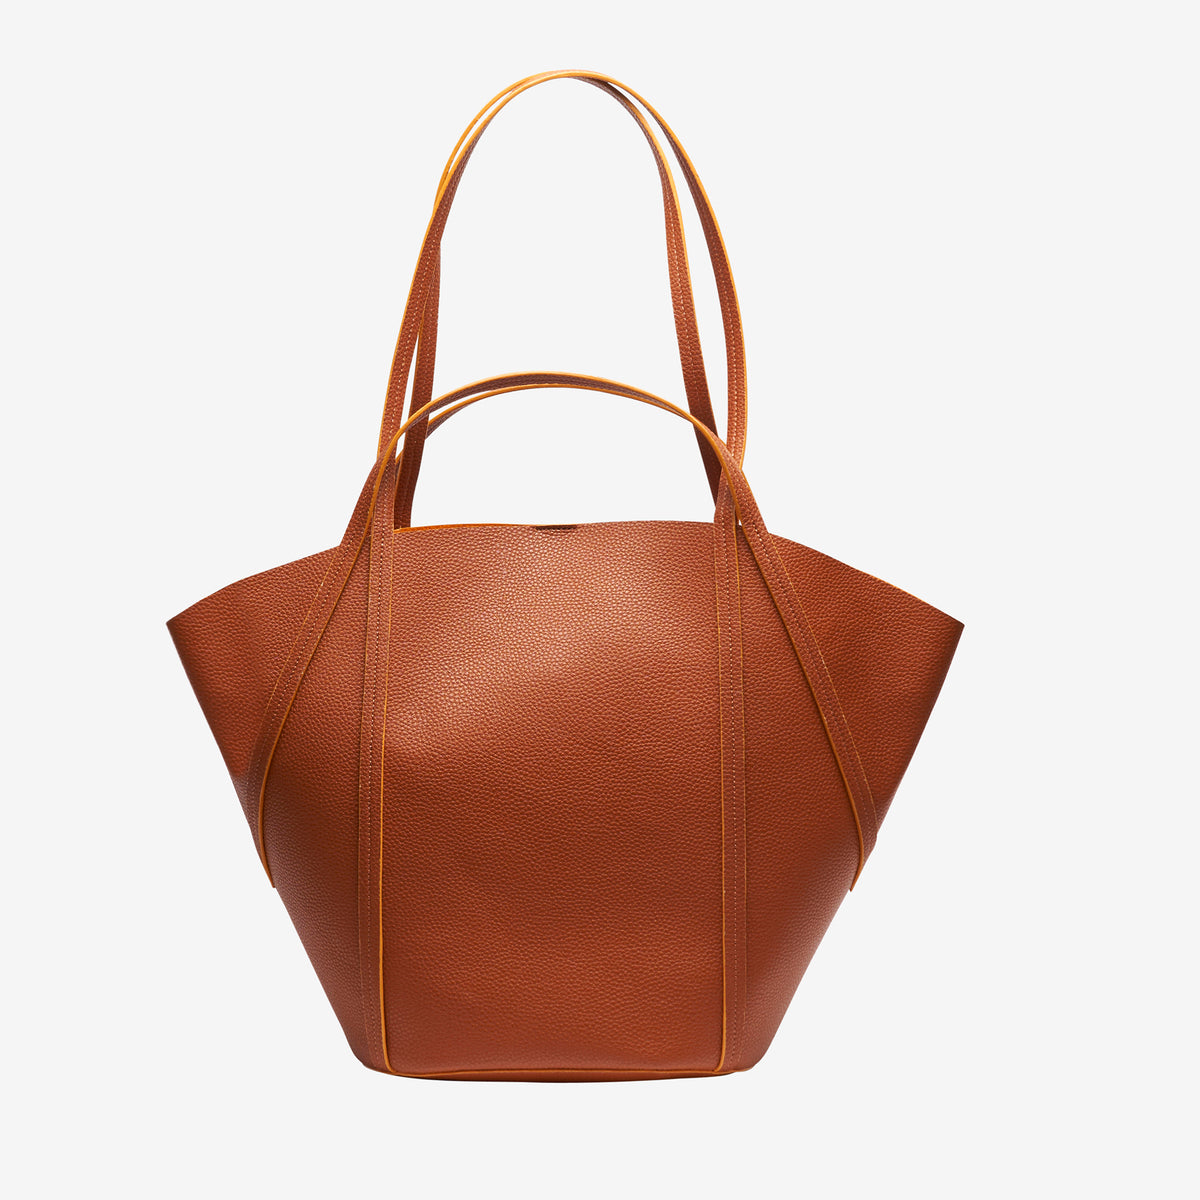     tusk-9931-recycled-sustainable-leather-tote-tan-front